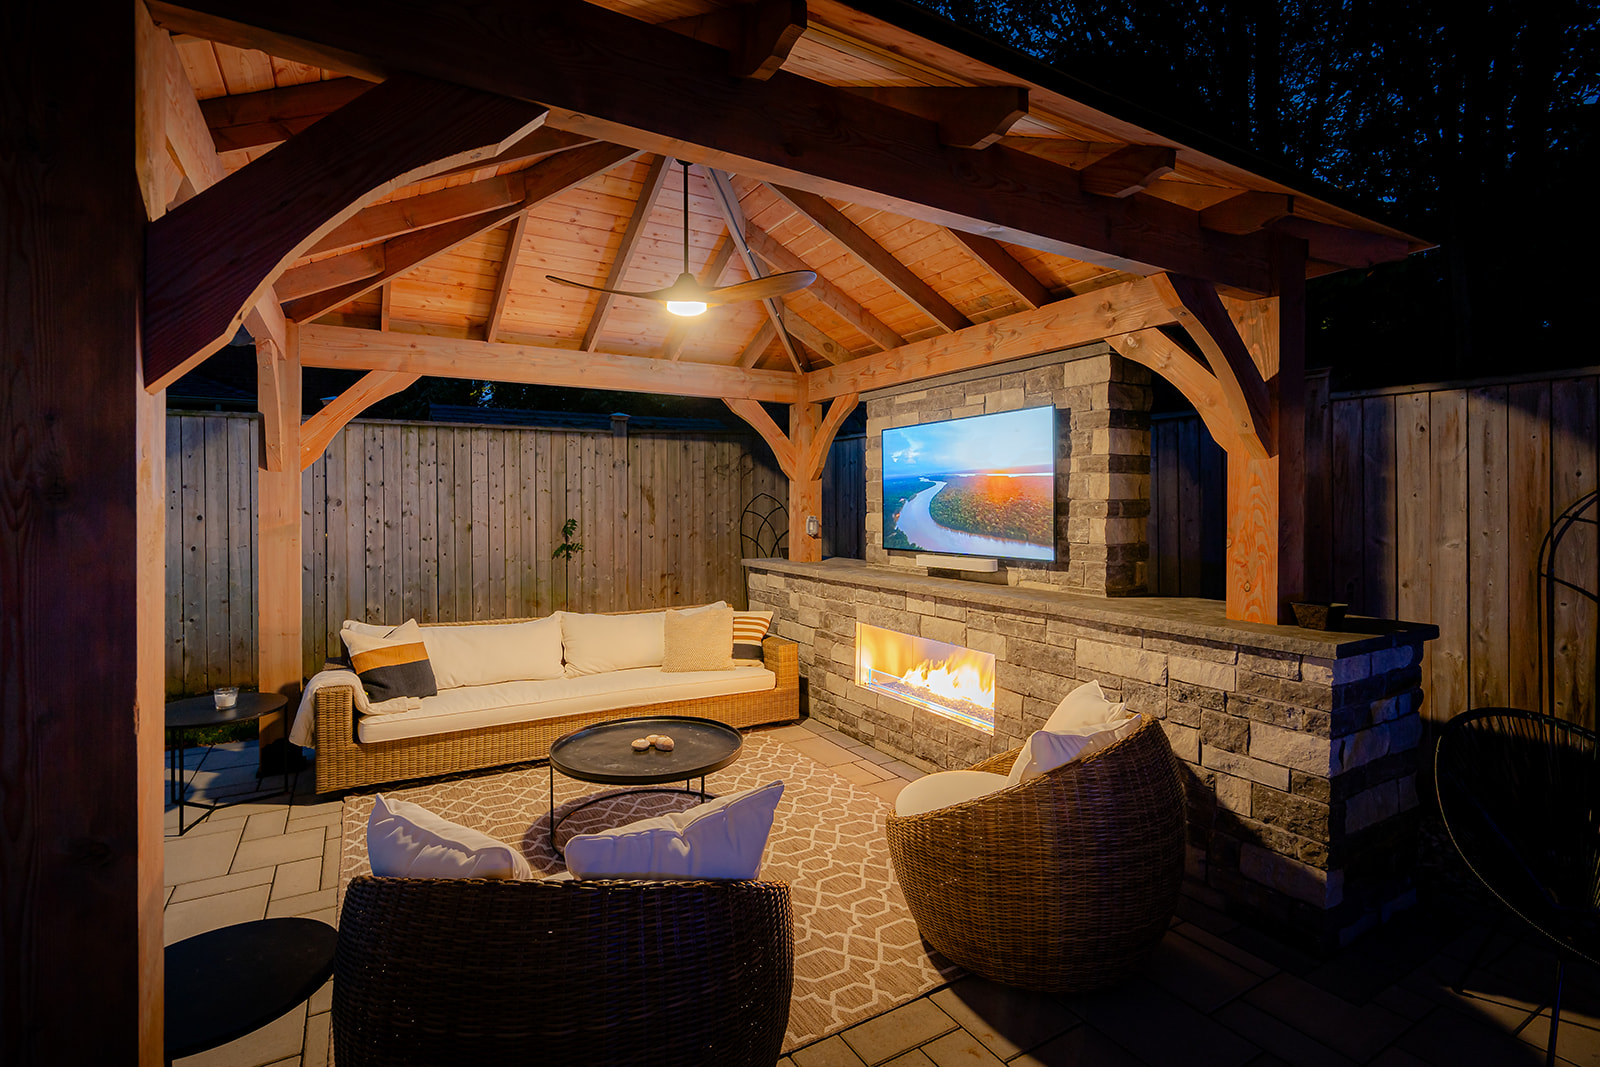 An outdoor patio set with the tv on underneath the gazebo.